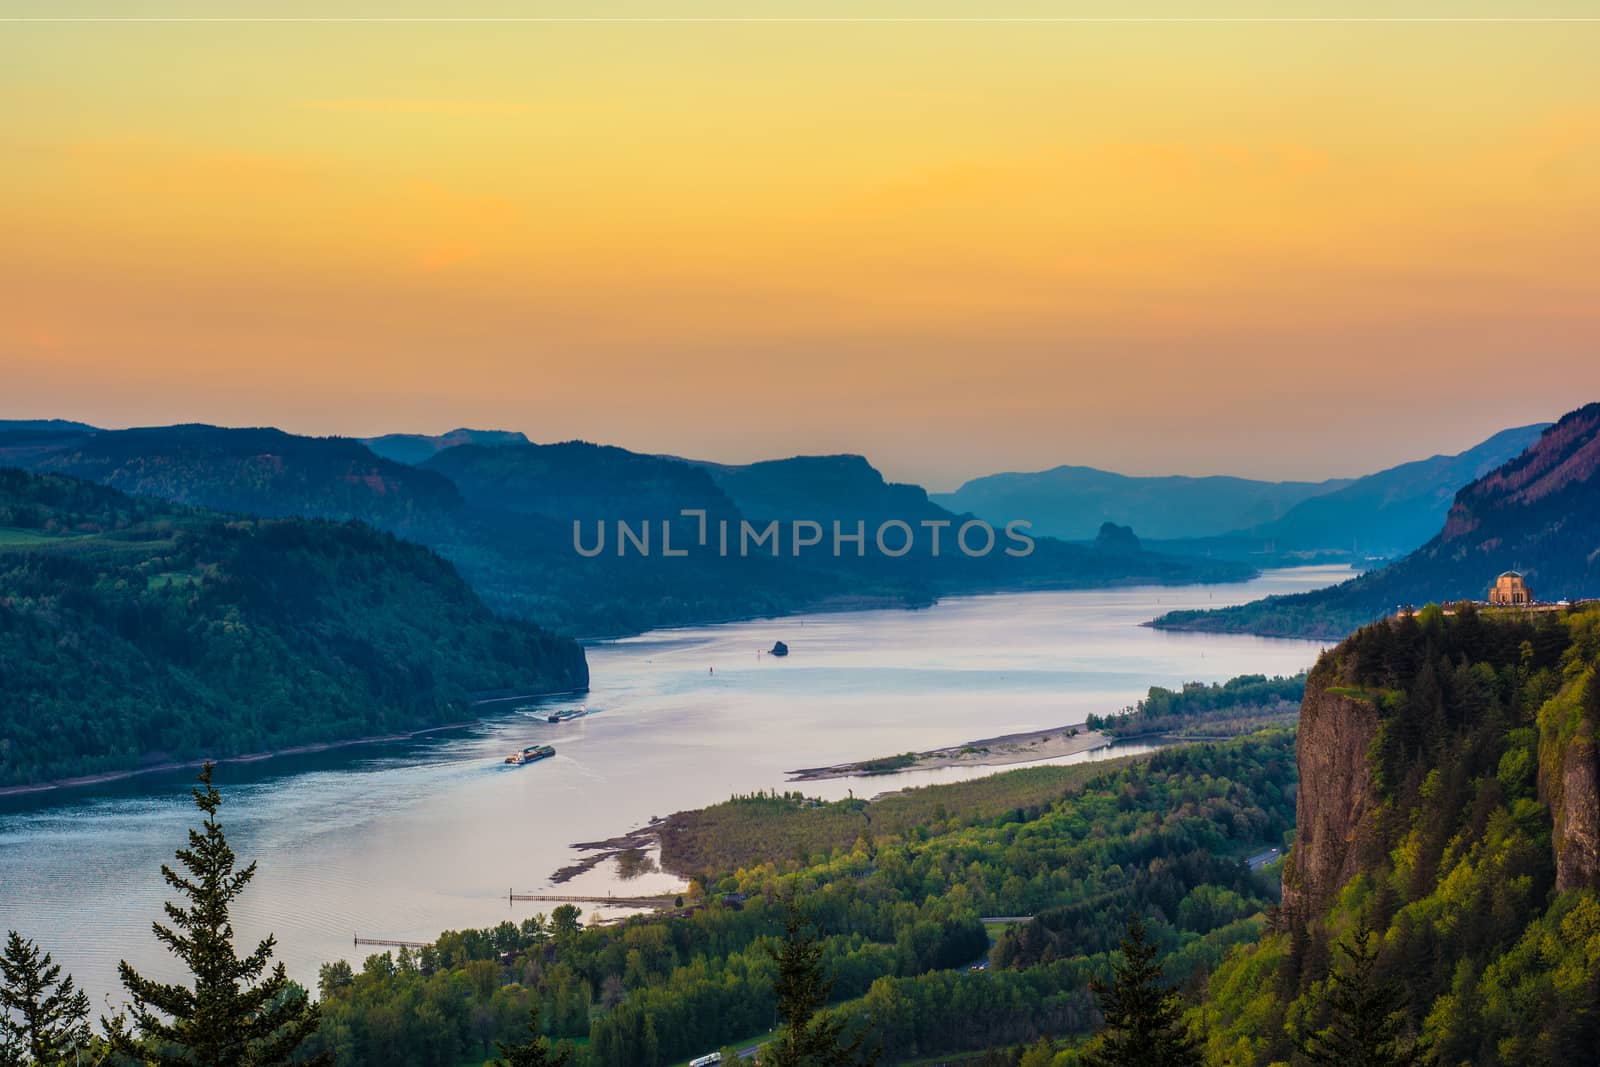 Sunset on the gorge from Portland Women's Forum viewpoint.